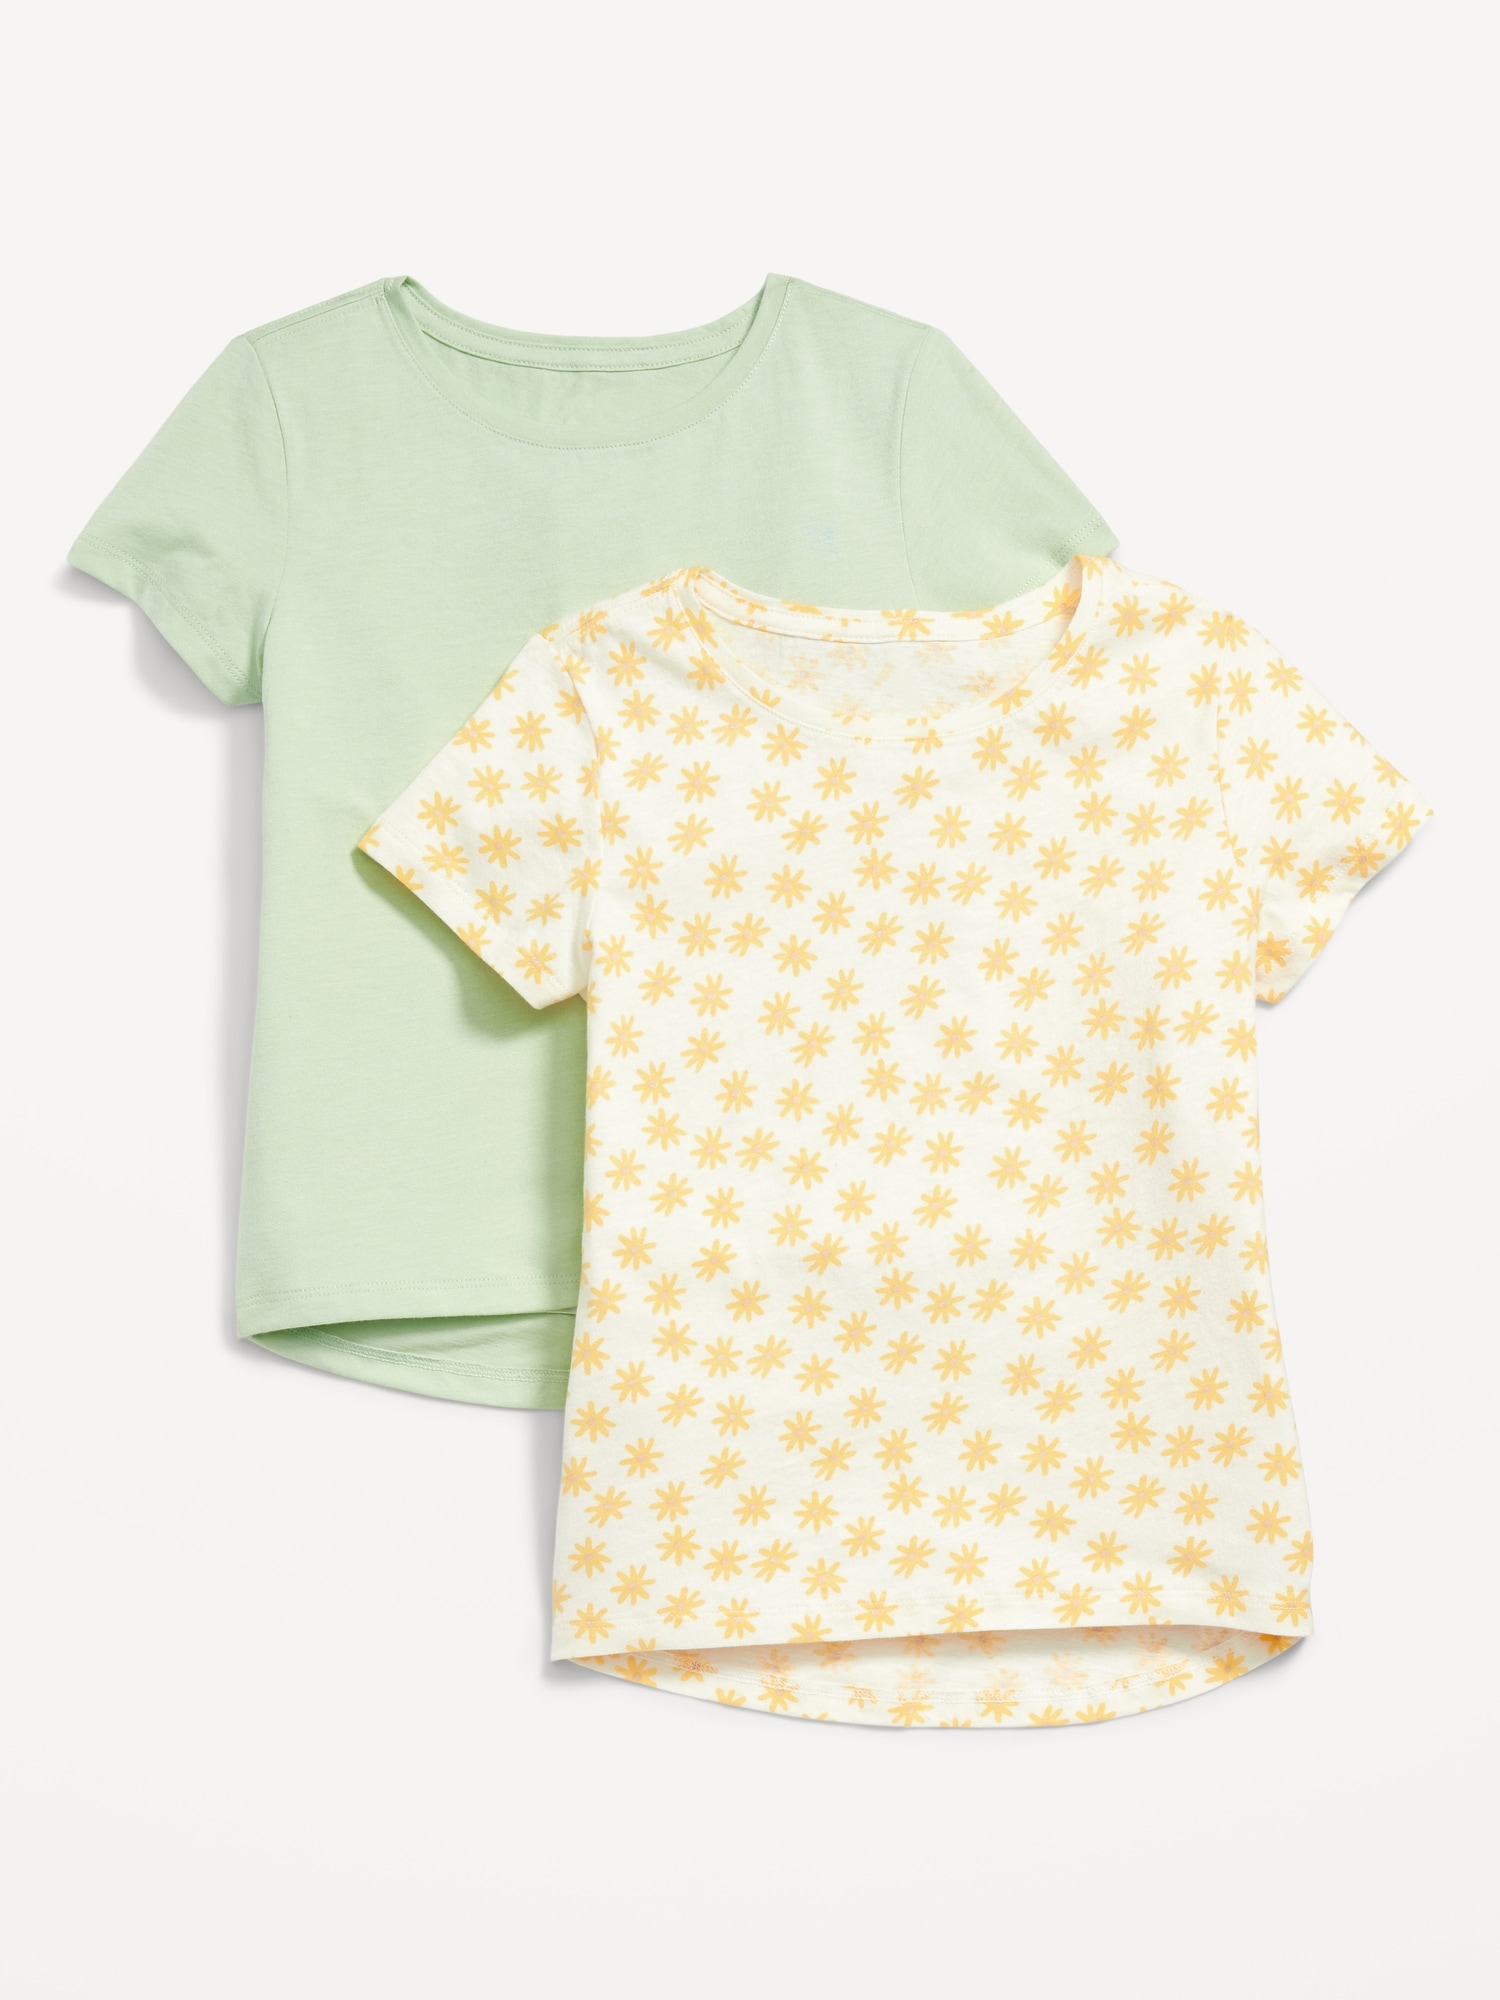 Old Navy Softest Printed T-Shirt 2-Pack for Girls green. 1